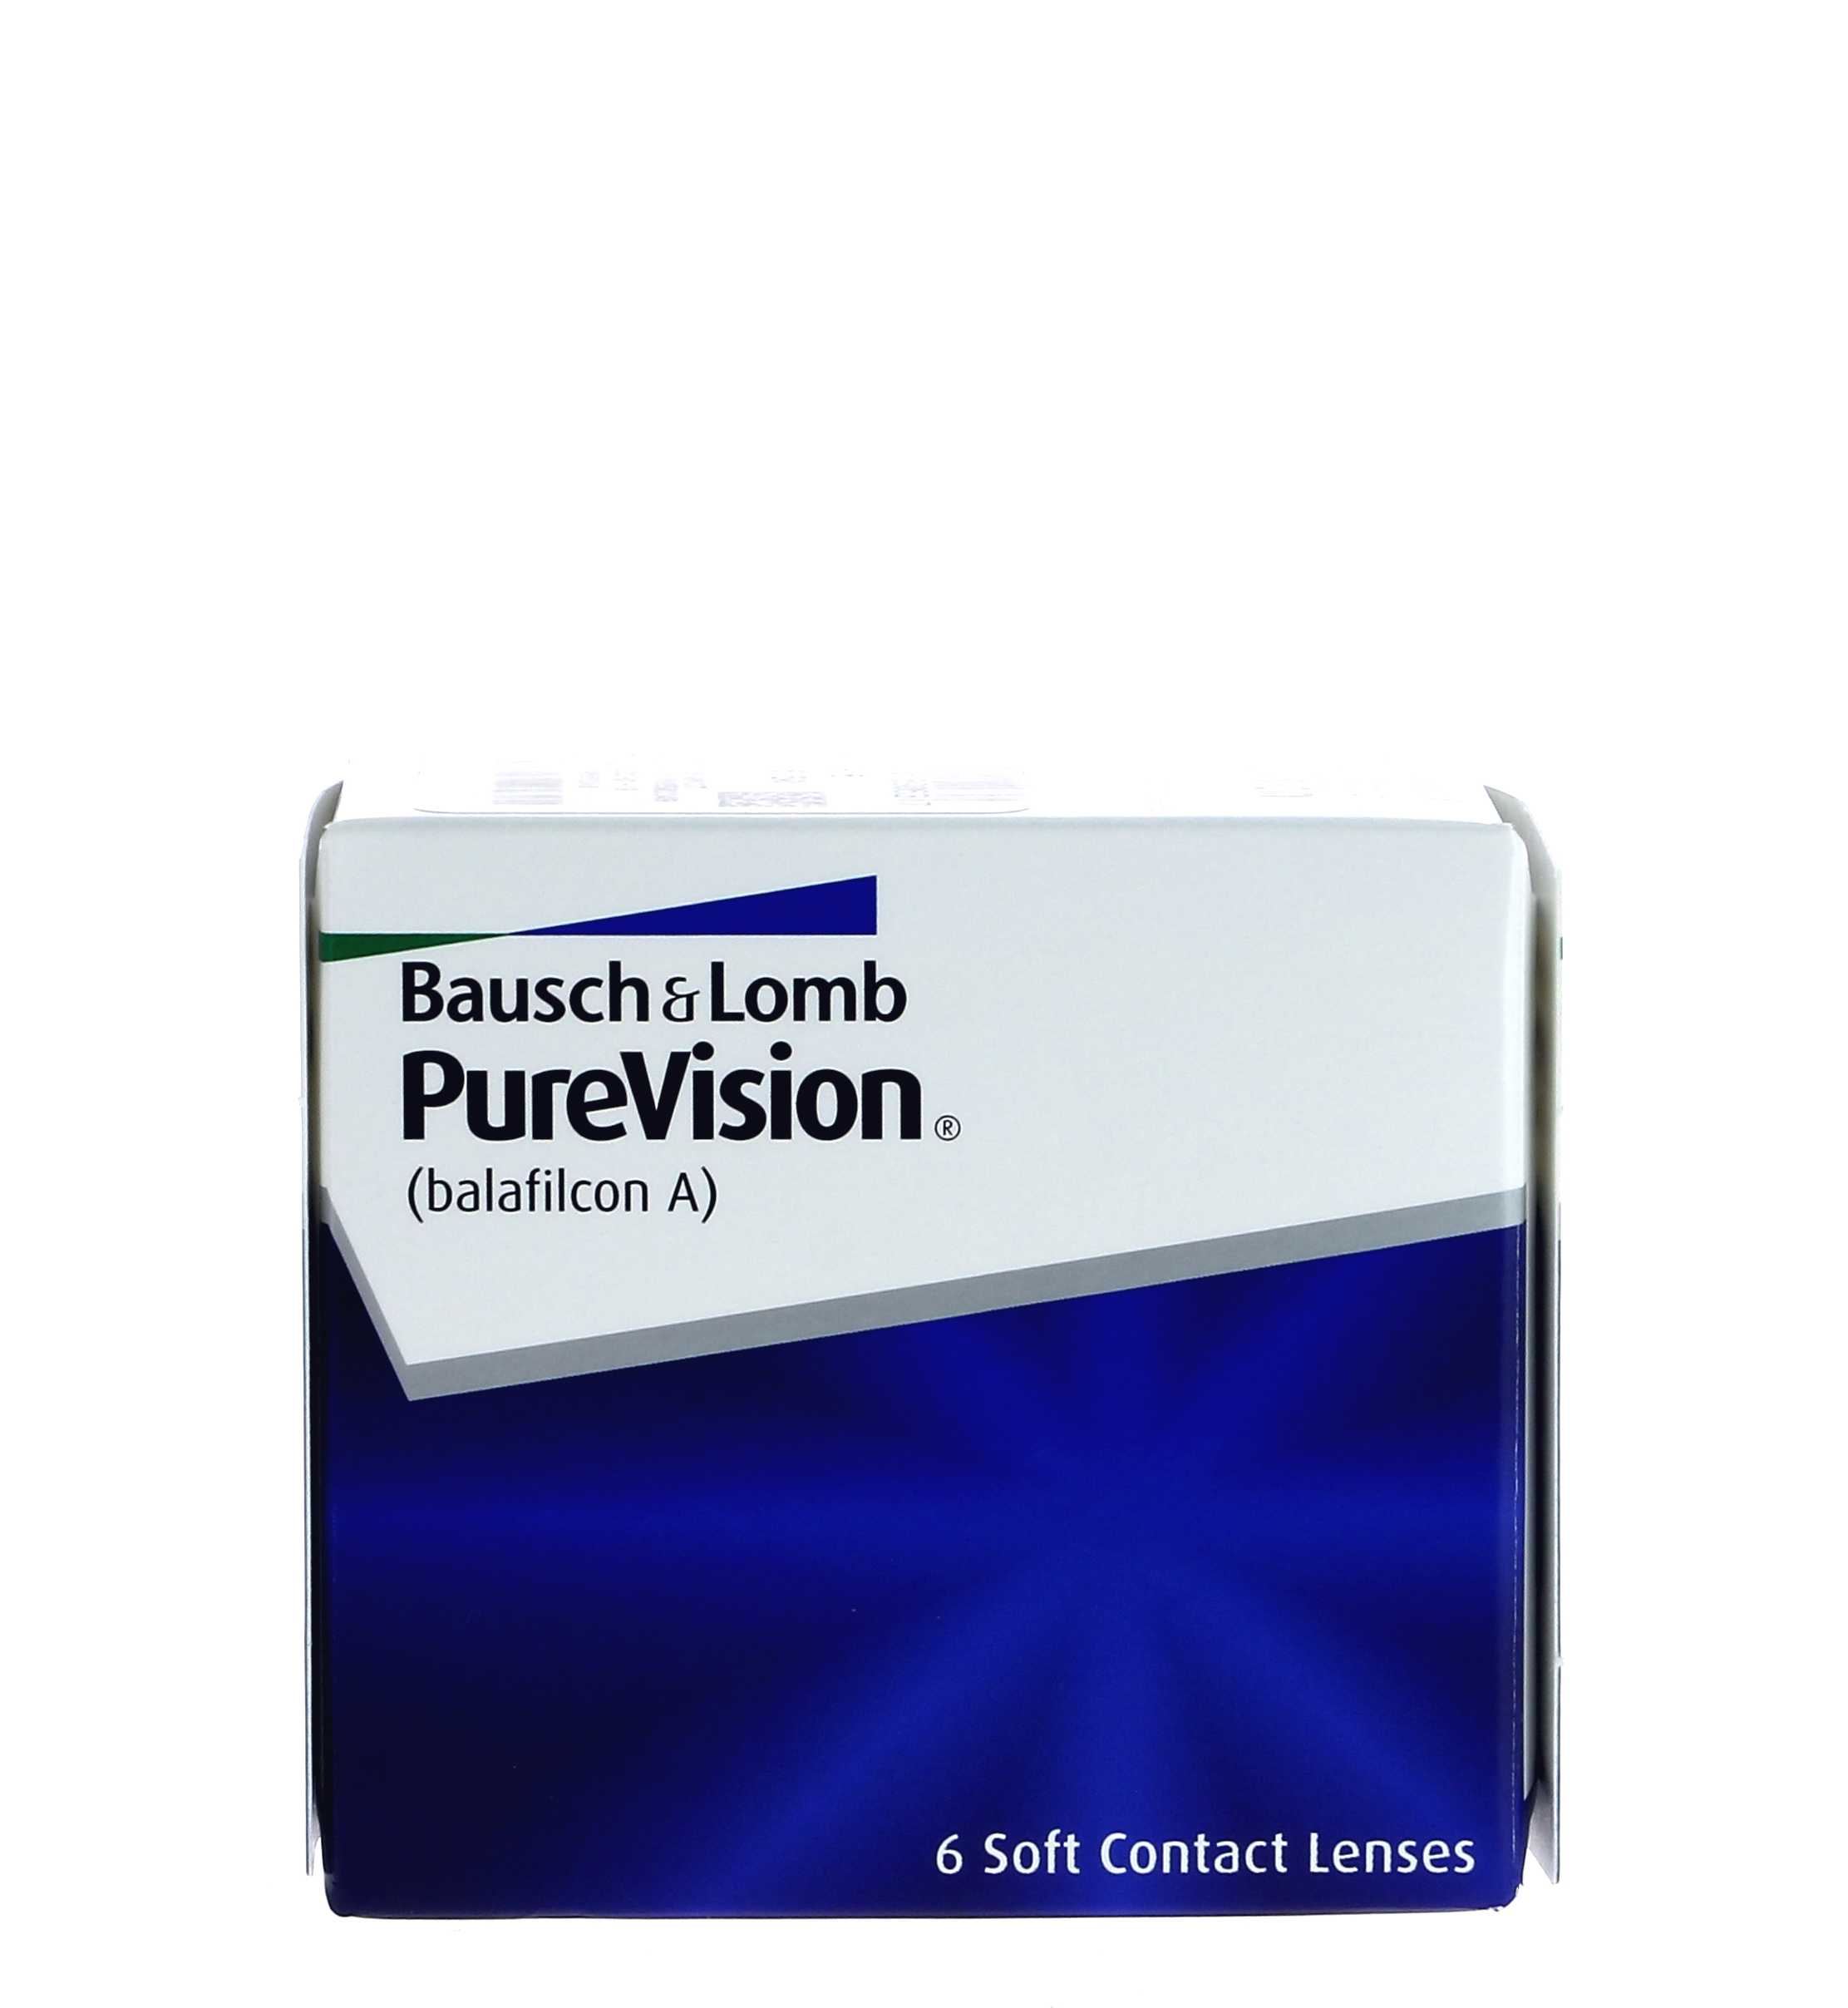  PUREVISION BAUSCH & LOMB